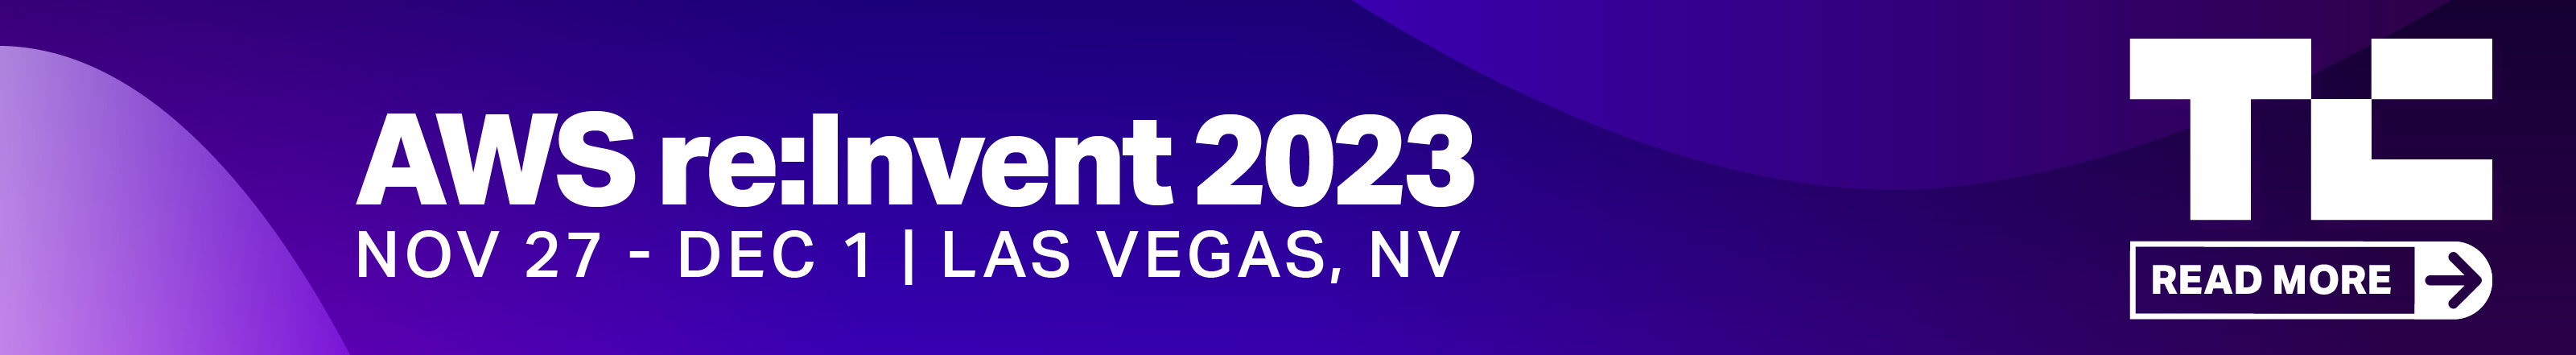 Read more about AWS re:Invent 2023 on CityandCoffee